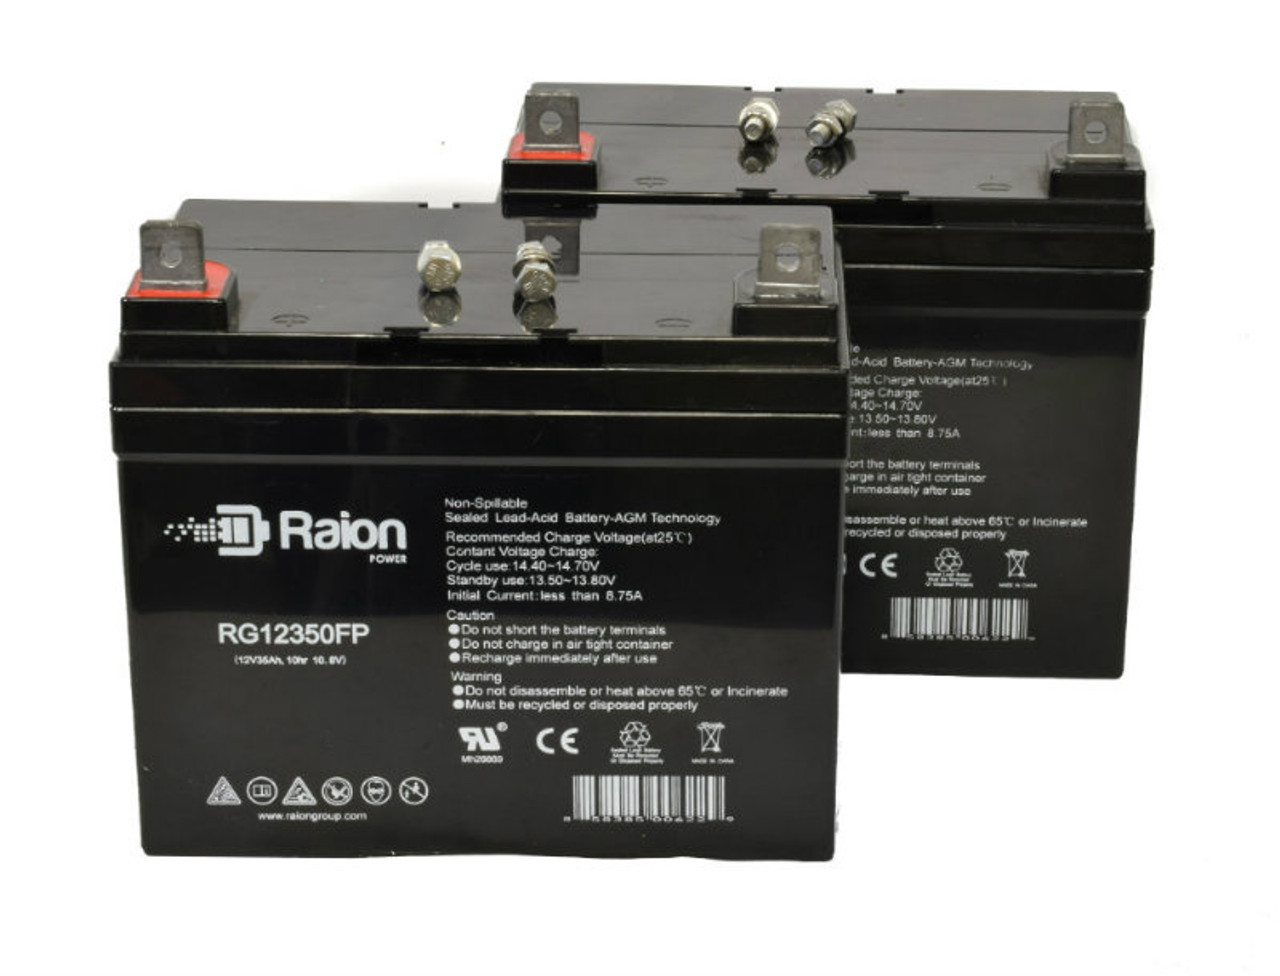 Raion Power Replacement 12V 35Ah Lawn Mower Battery for Ingersol Equipment 5018 - 2 Pack